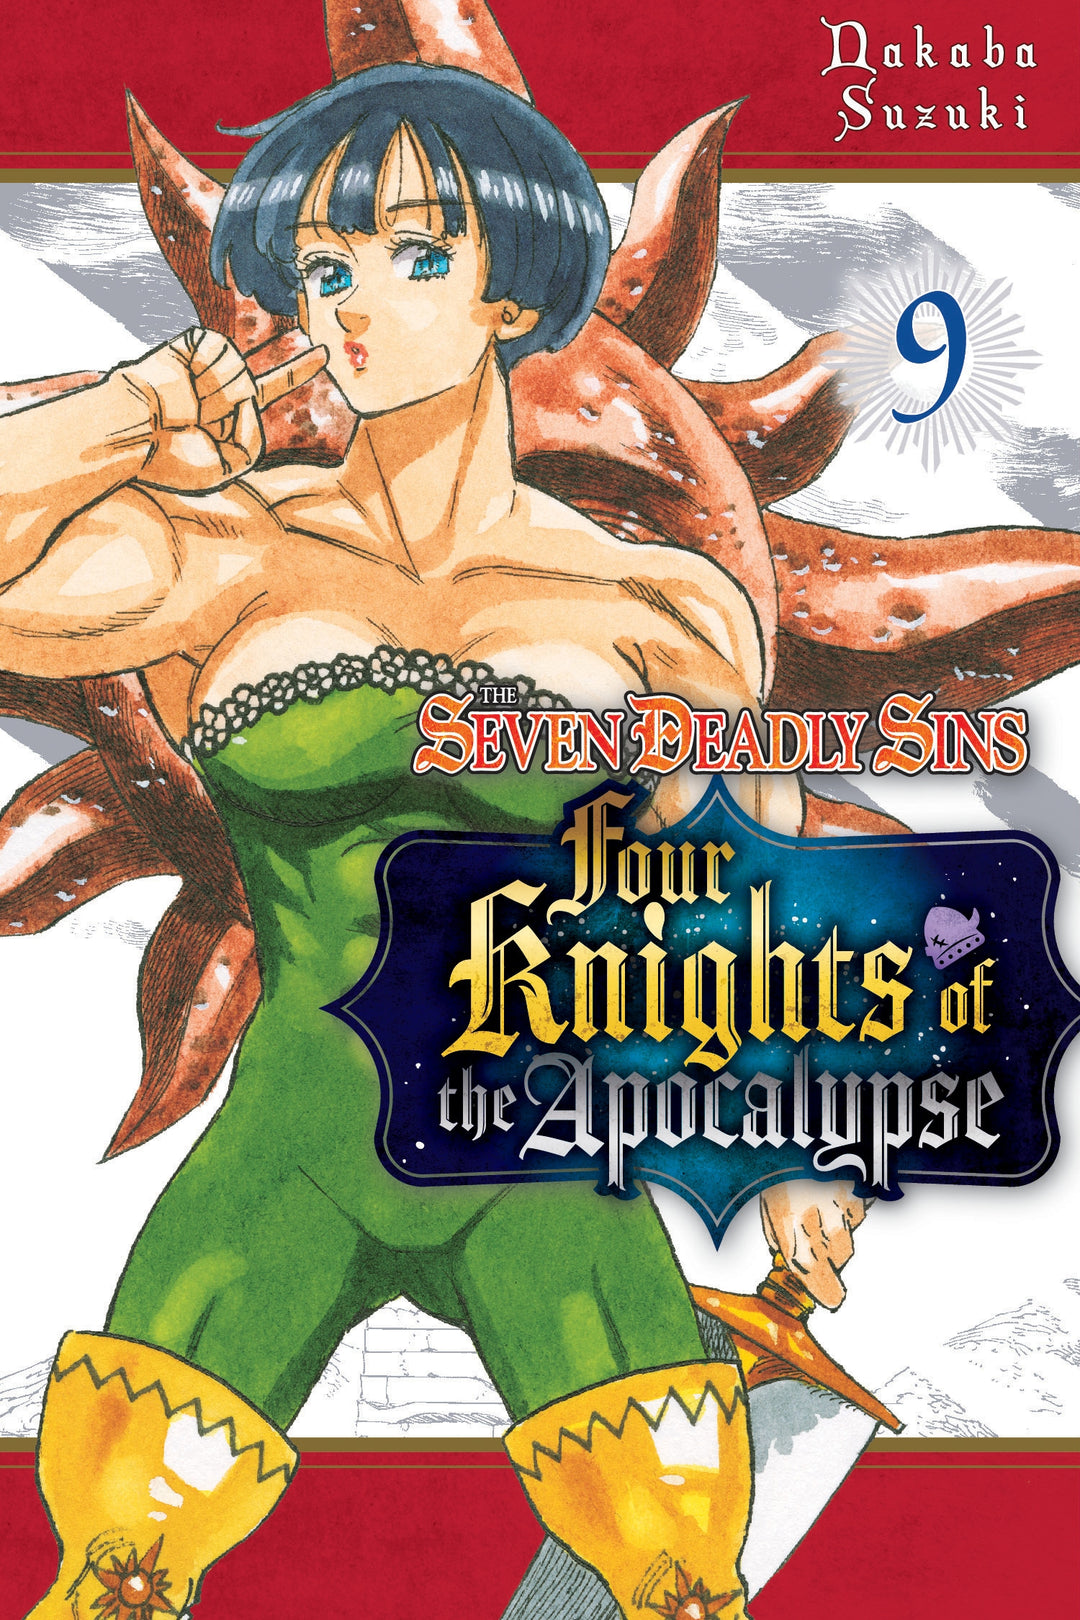 The Seven Deadly Sins Four Knights Of The Apocalypse, Vol. 09